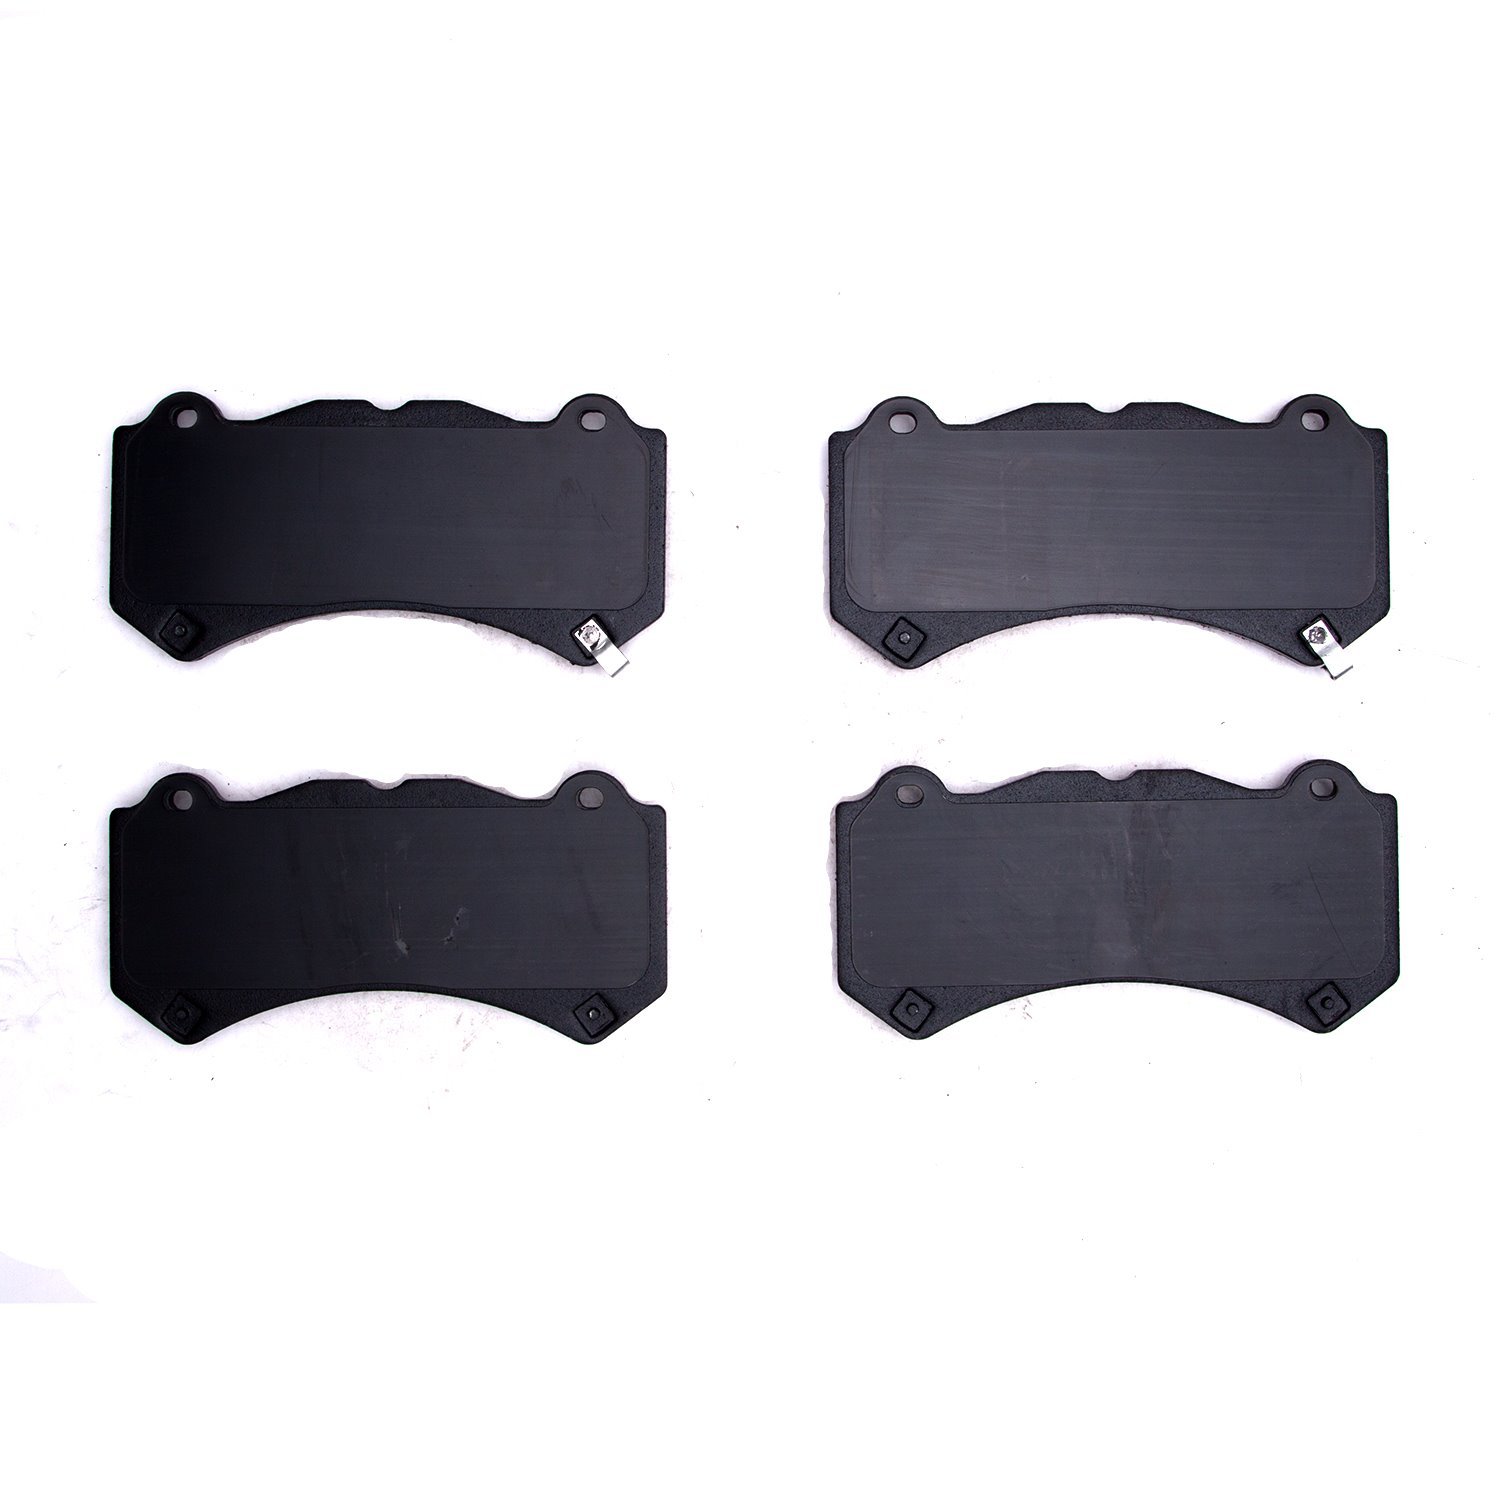 1000-1405-00 Track/Street Low-Metallic Brake Pads Kit, Fits Select Multiple Makes/Models, Position: Front